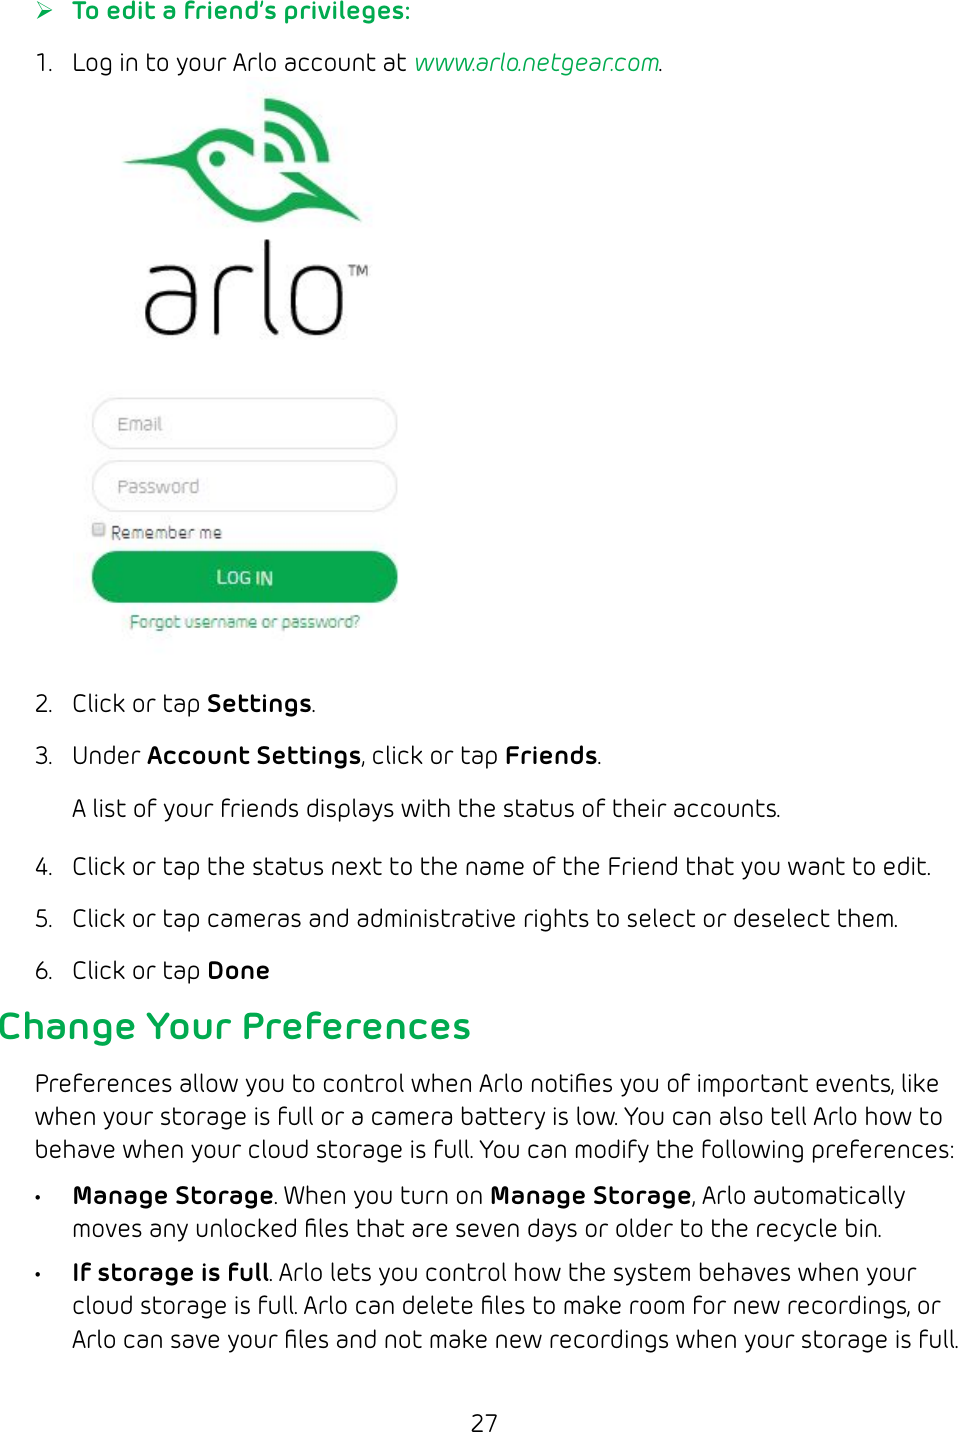 27 ¾To edit a friend’s privileges:1.  Log in to your Arlo account at www.arlo.netgear.com.2.  Click or tap Settings.3.  Under Account Settings, click or tap Friends.A list of your friends displays with the status of their accounts.4.  Click or tap the status next to the name of the Friend that you want to edit.5.  Click or tap cameras and administrative rights to select or deselect them.6.  Click or tap DoneChange Your PreferencesPreferences allow you to control when Arlo notiﬁes you of important events, like when your storage is full or a camera battery is low. You can also tell Arlo how to behave when your cloud storage is full. You can modify the following preferences:• Manage Storage. When you turn on Manage Storage, Arlo automatically moves any unlocked ﬁles that are seven days or older to the recycle bin.• If storage is full. Arlo lets you control how the system behaves when your cloud storage is full. Arlo can delete ﬁles to make room for new recordings, or Arlo can save your ﬁles and not make new recordings when your storage is full.